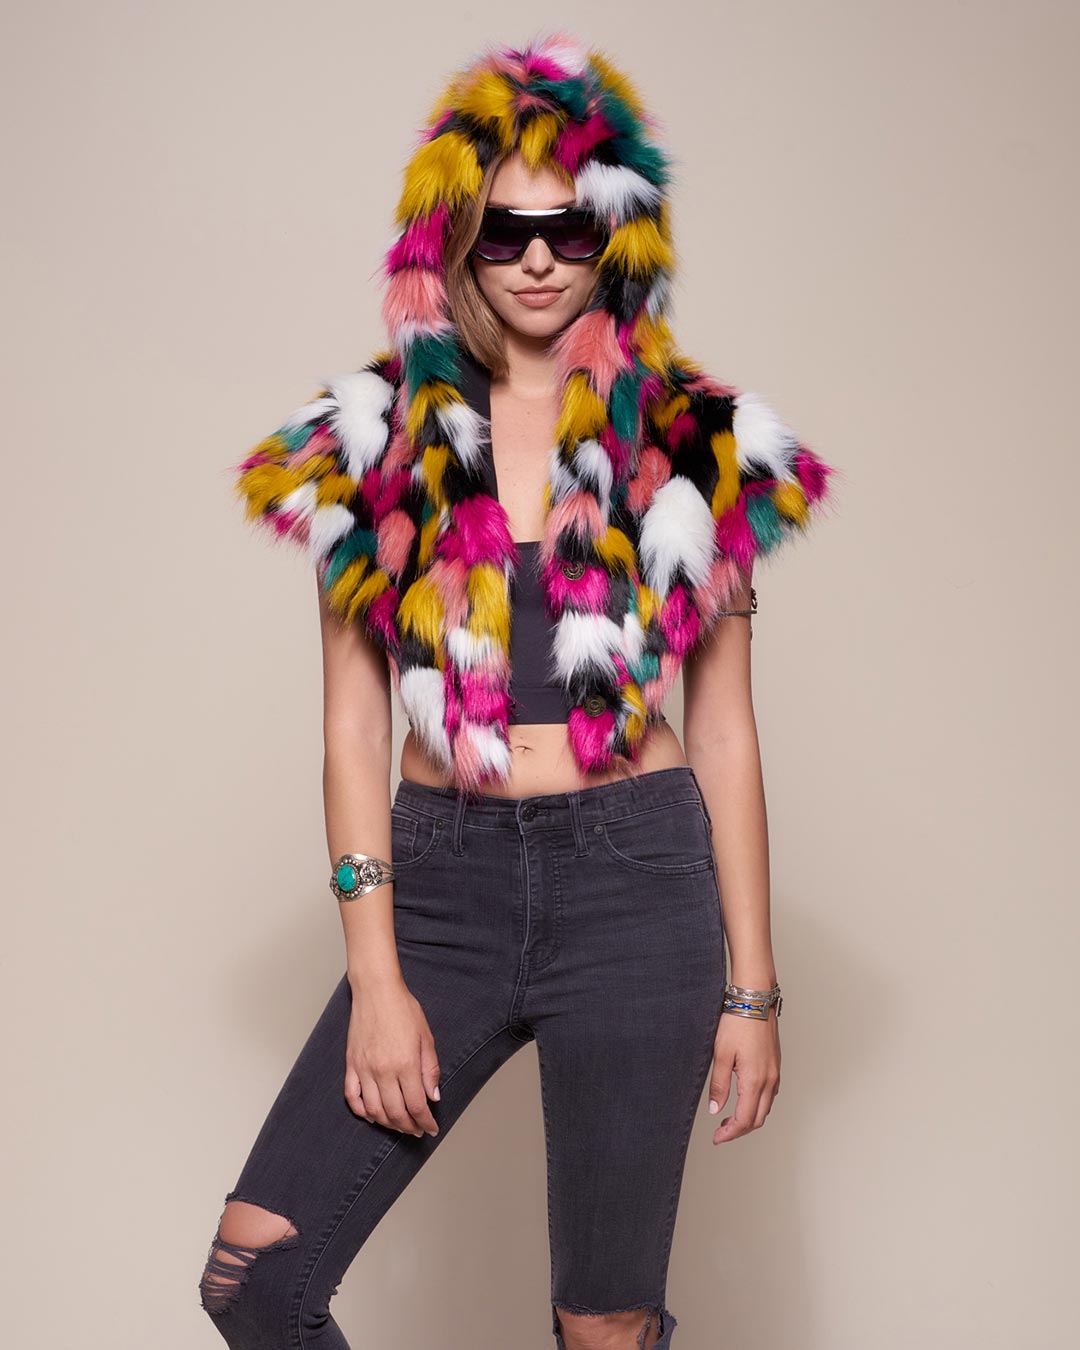 Faux Fur Shawl with Hood in Rainbow Butterfly Design on Female Model in Sunglasses